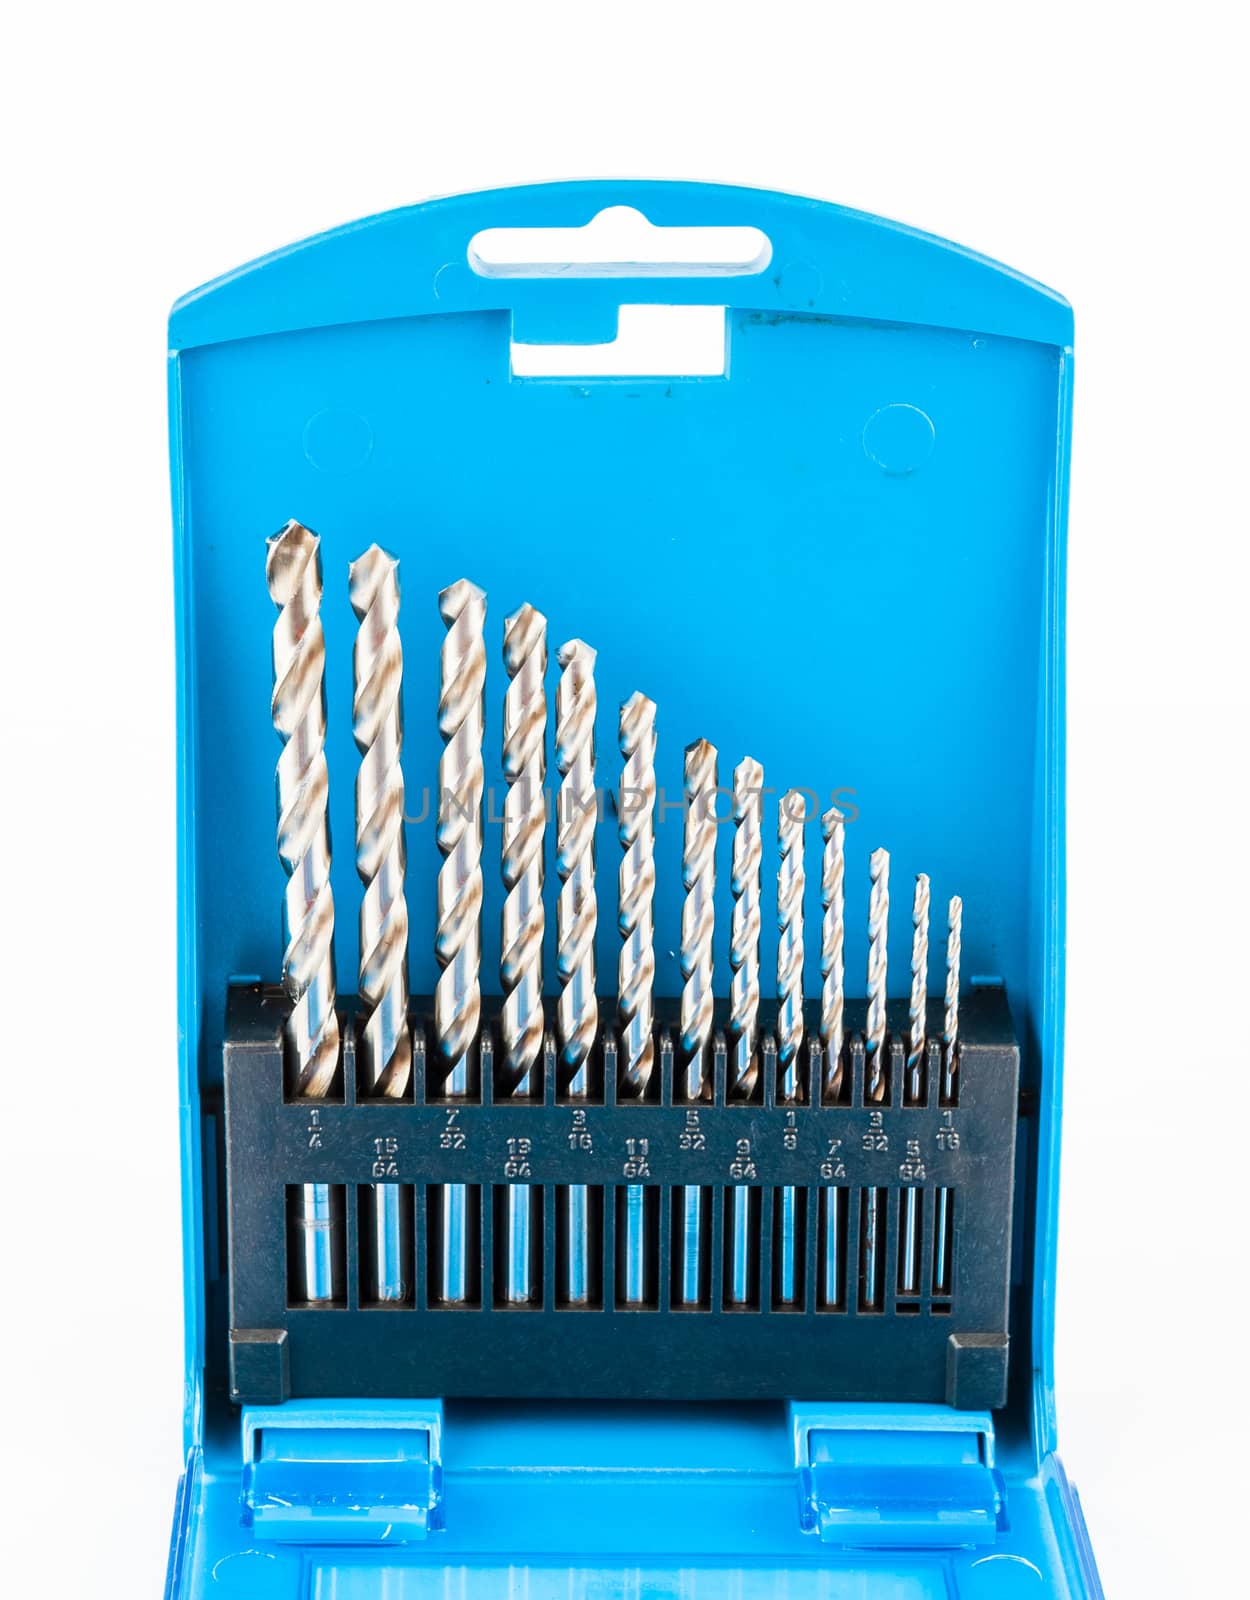 Blue Box Set of Drill Bits by noneam